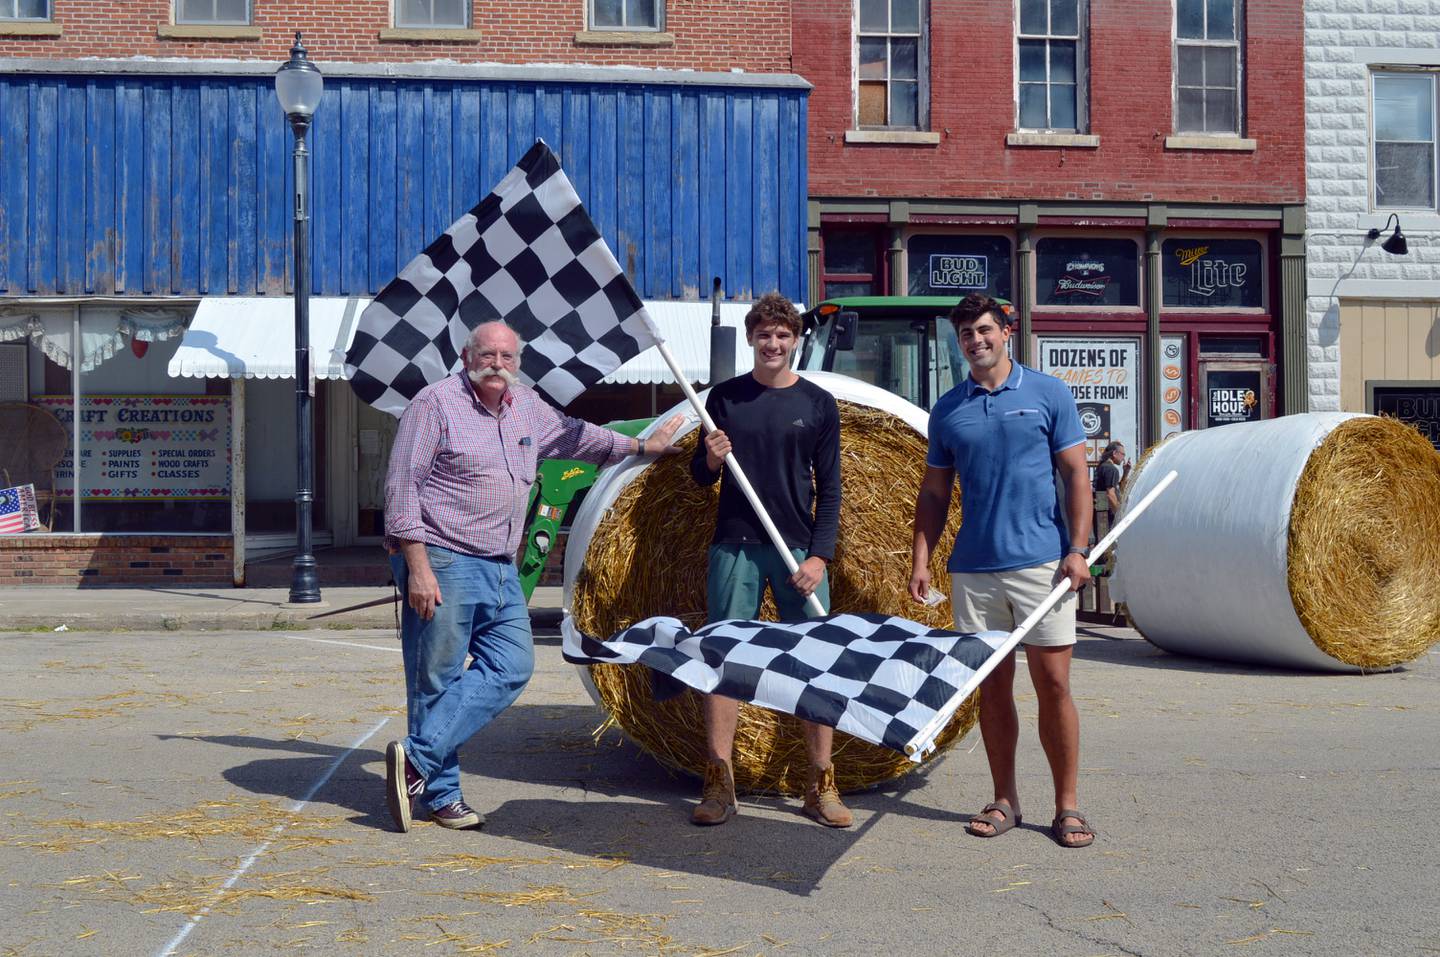 Tyler Willman, right and Levi Schuler, center both of Pine Creek, pose with U.S. National Straw Sculpting Competition organizer Jeff Bold in front of a 700-pound straw bale on Aug. 27 during StrawFest Day. Willman and Schuler won the races by rolling the bale 75 feet in 10.08 seconds.